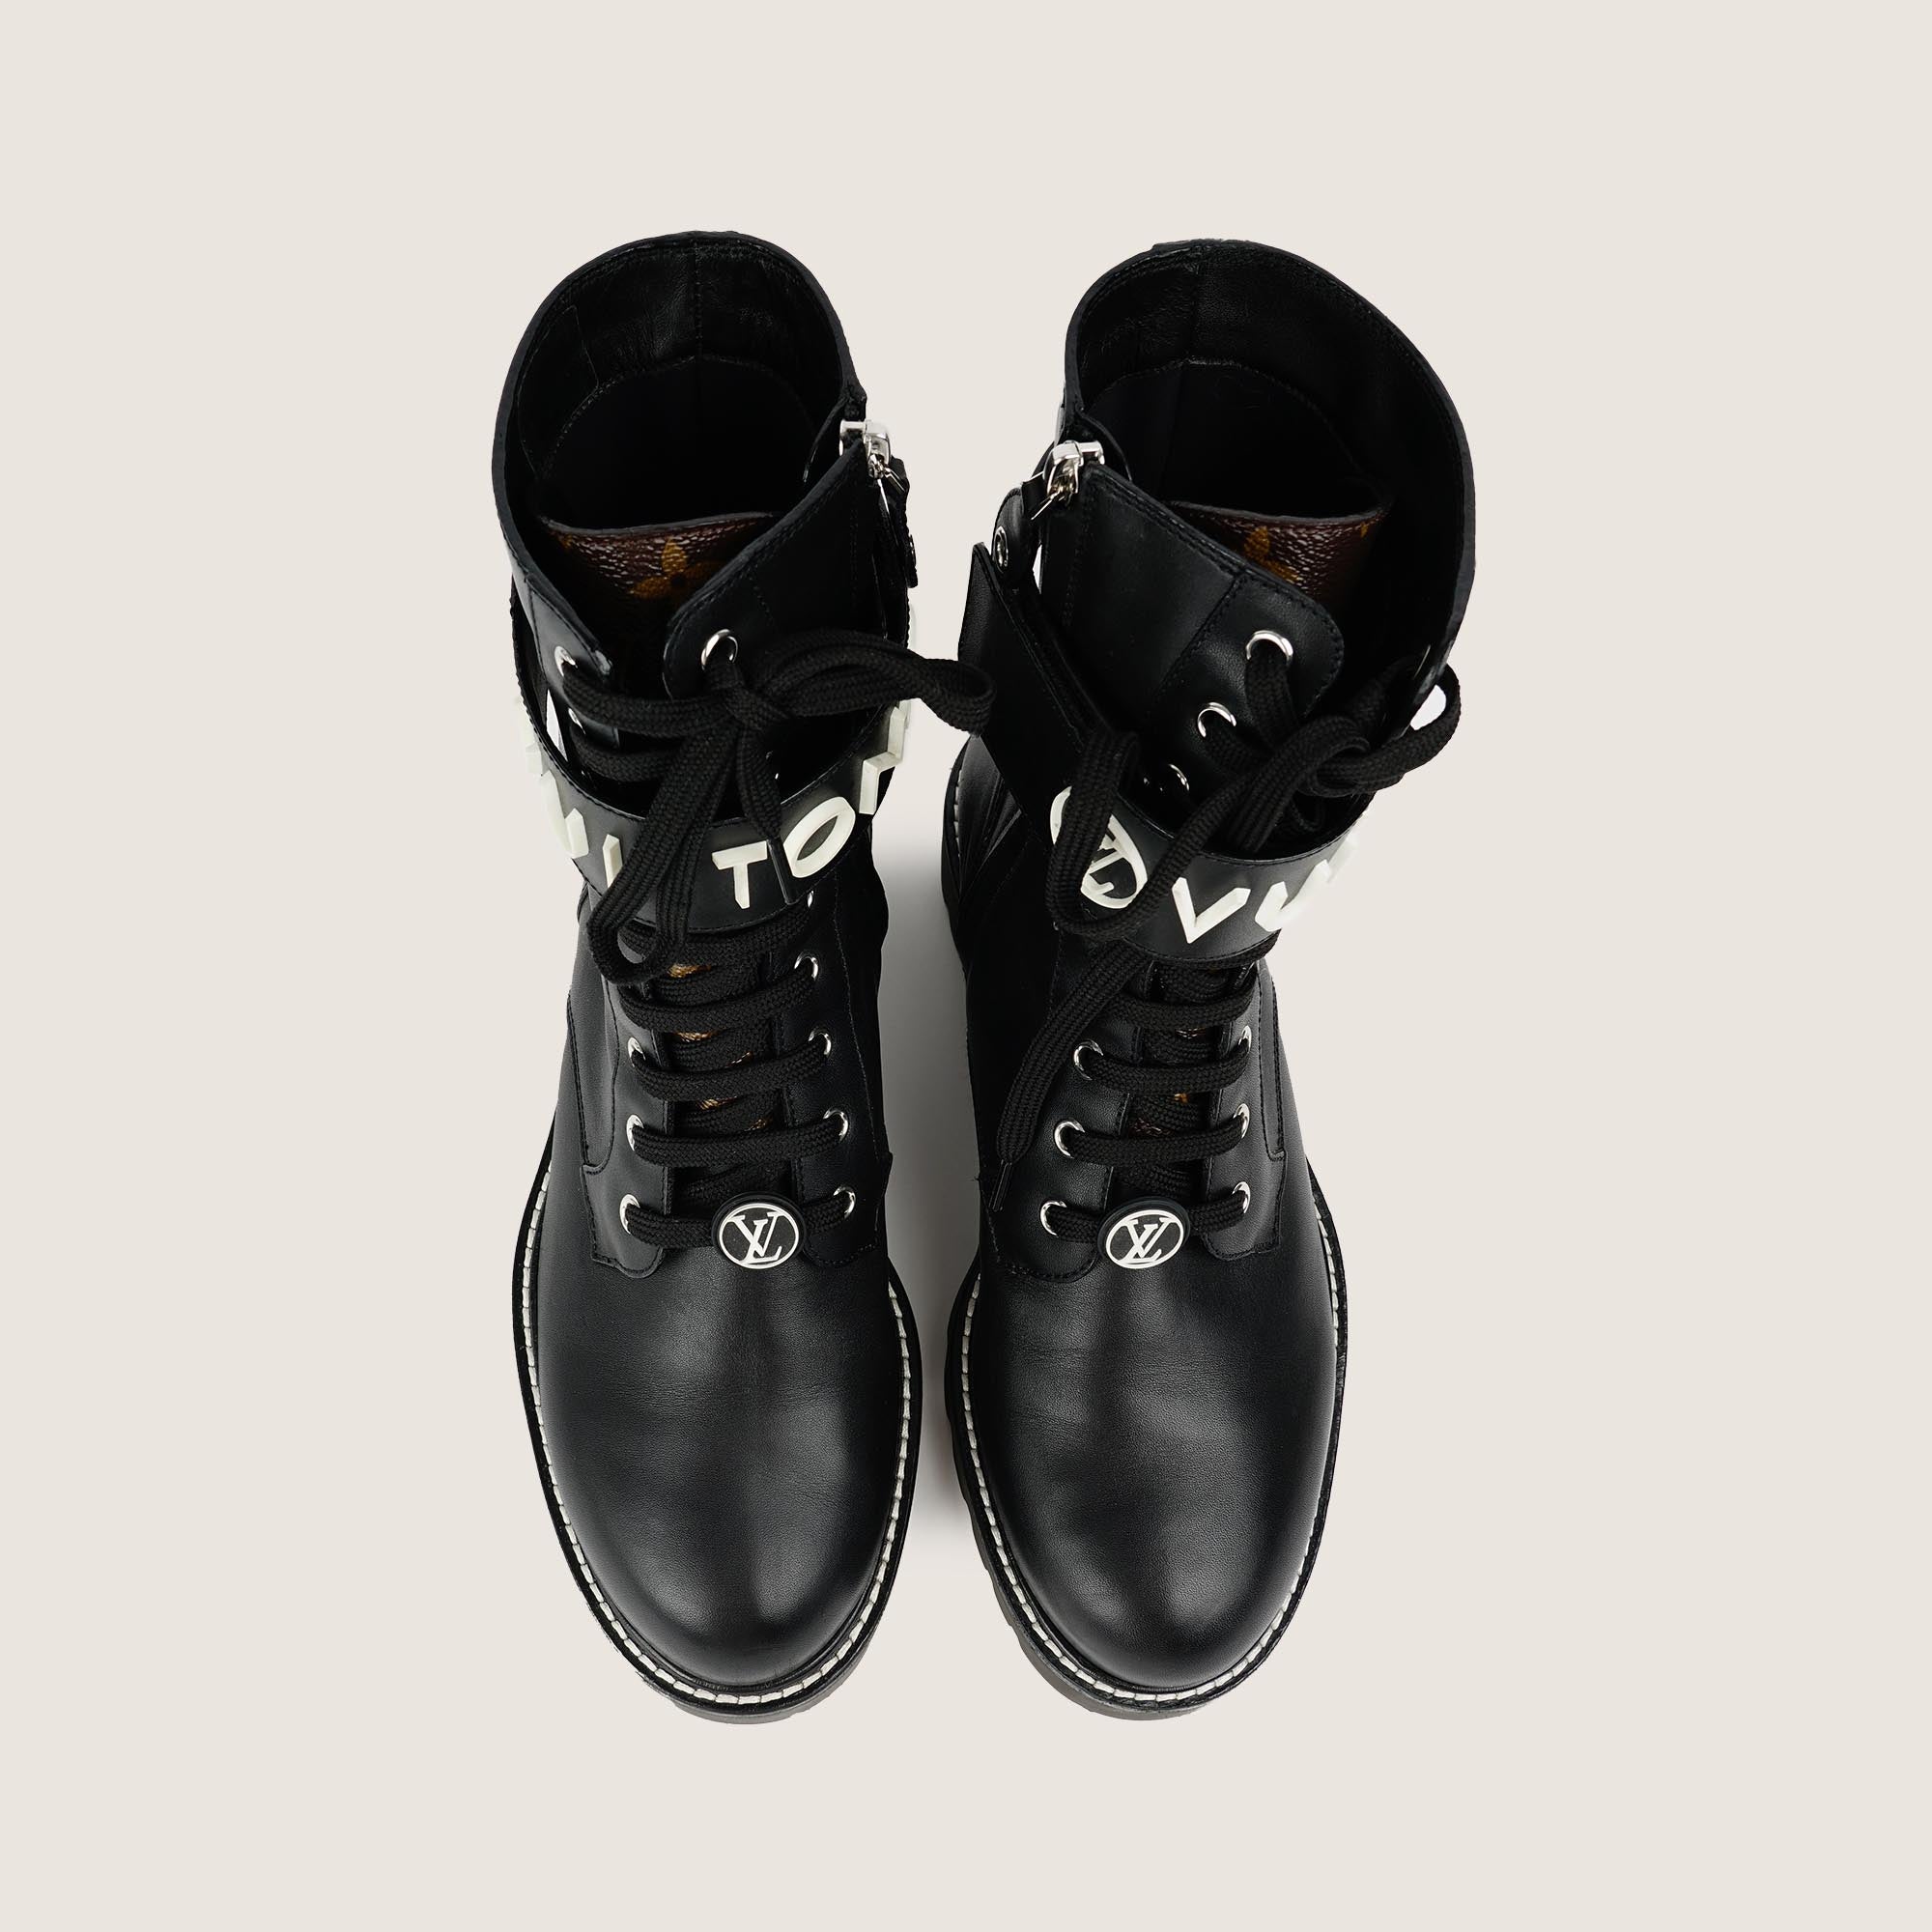 Territory Flat Ranger Boots 39 - LOUIS VUITTON - Affordable Luxury image